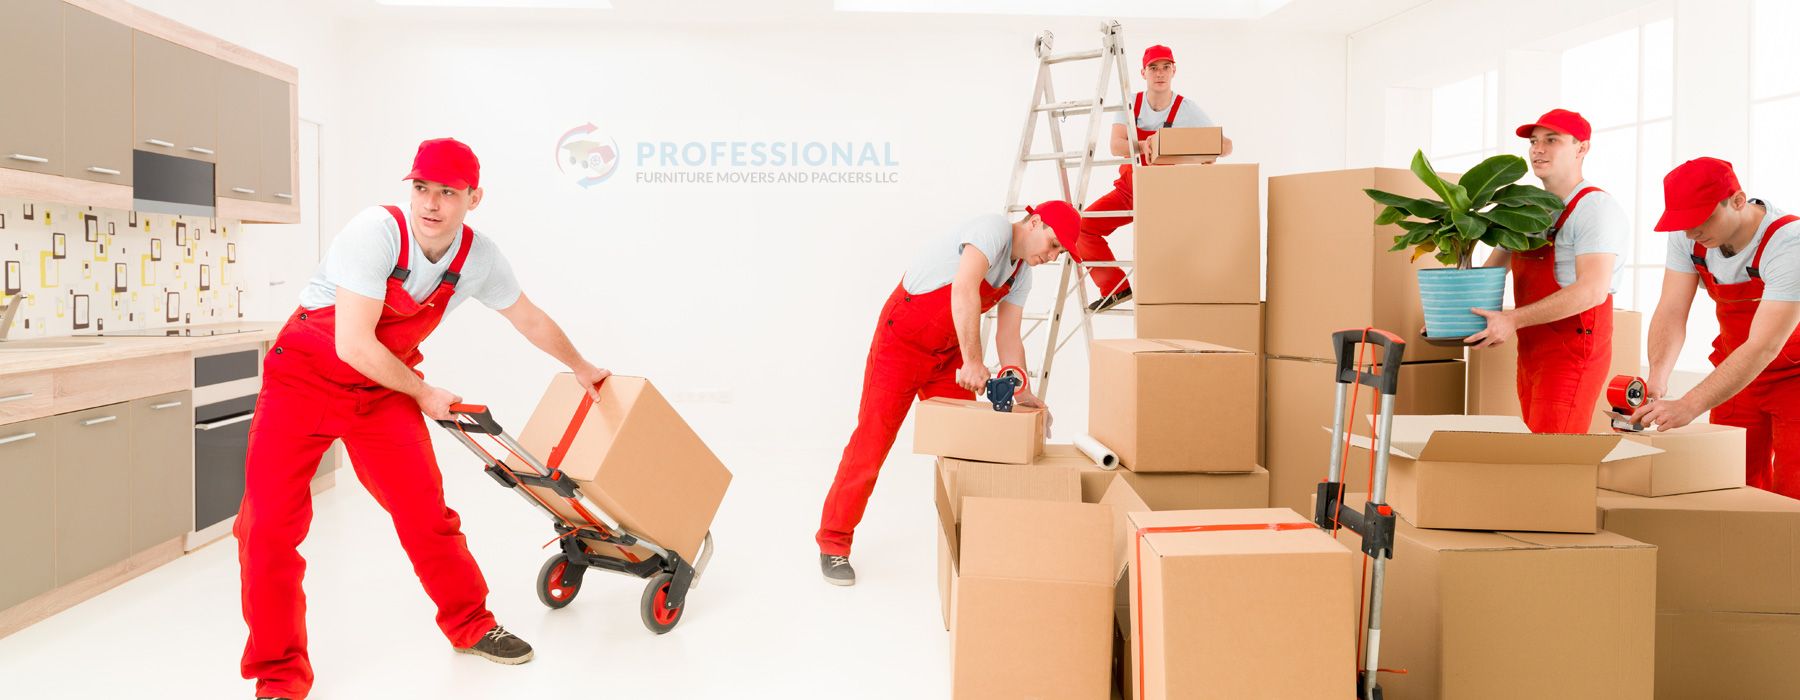 Professional Movers And Packers in Dubai -Best Movers & Packers